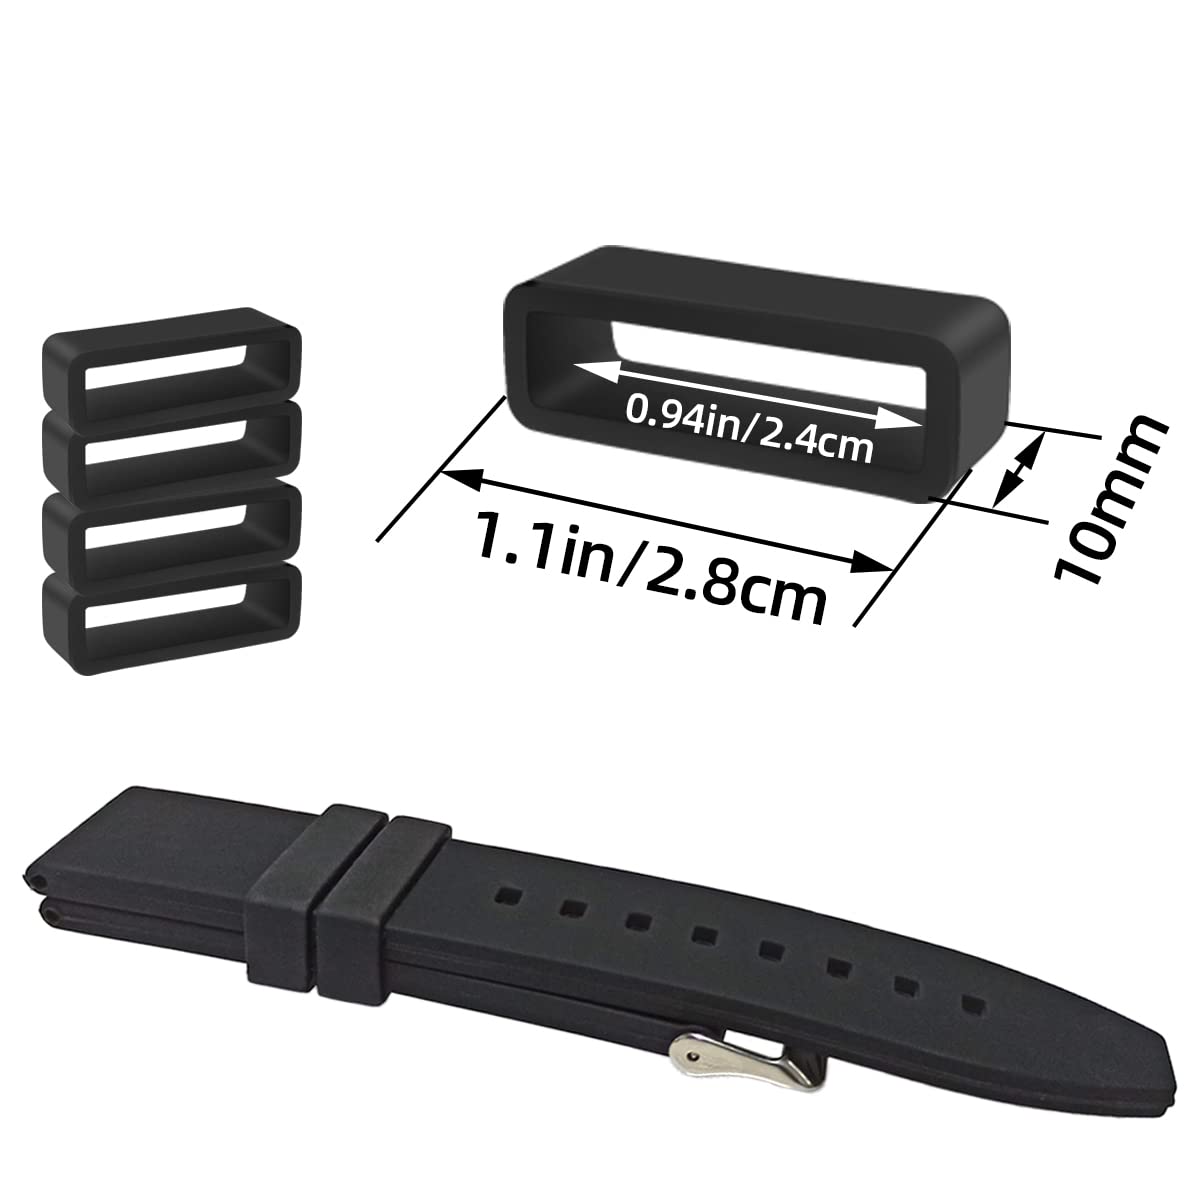 6 Pcs Watch Band Loop Holder Keeper for Resin Belt, Replacement Fastener Rings for Silicone Leather Rubber Watch Strap, Durable Fastener Retainer Size(24mm)